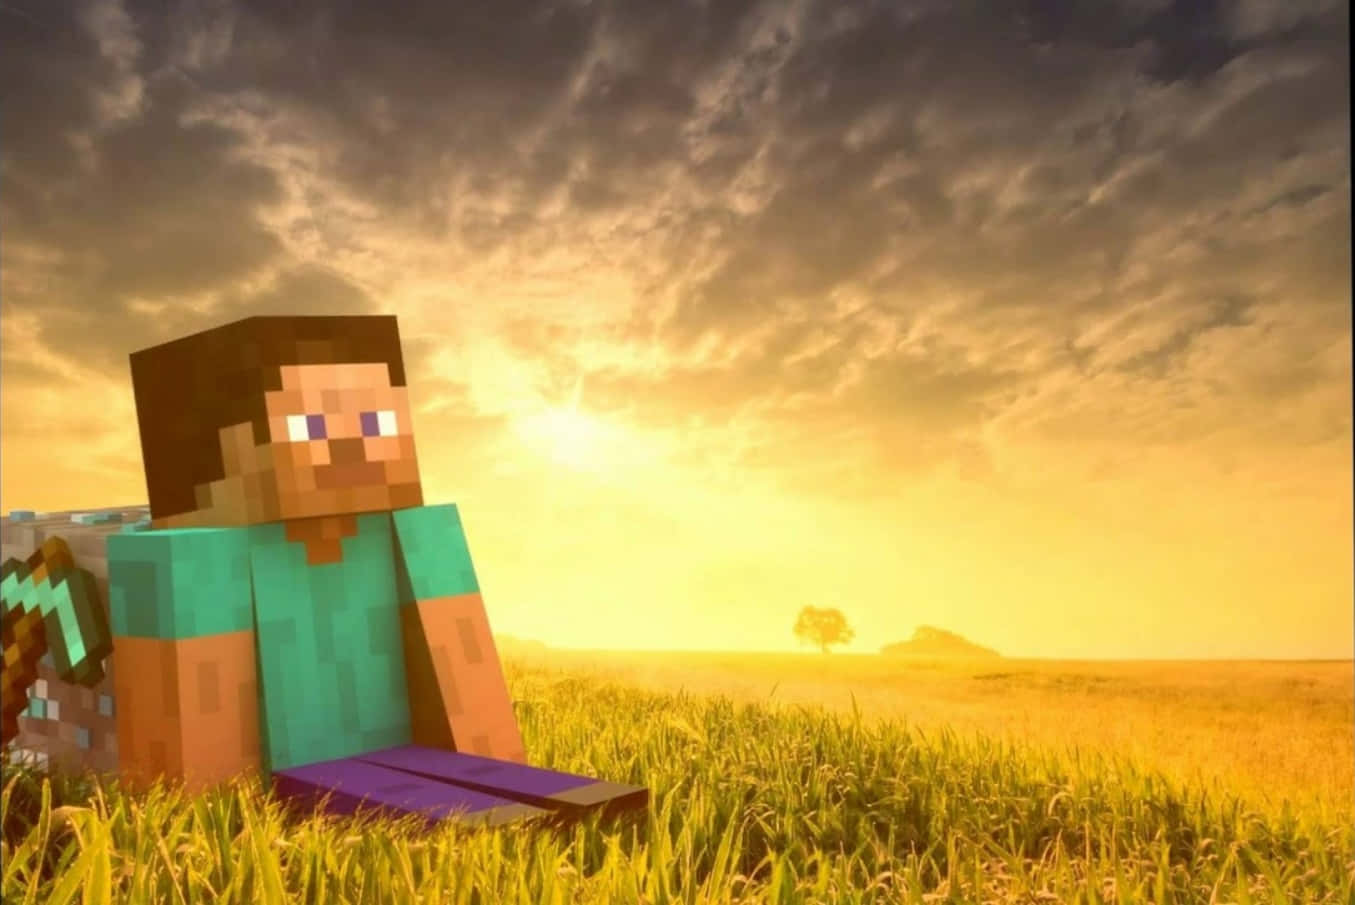 Minecraft Characters On Grass At Sunset Picture